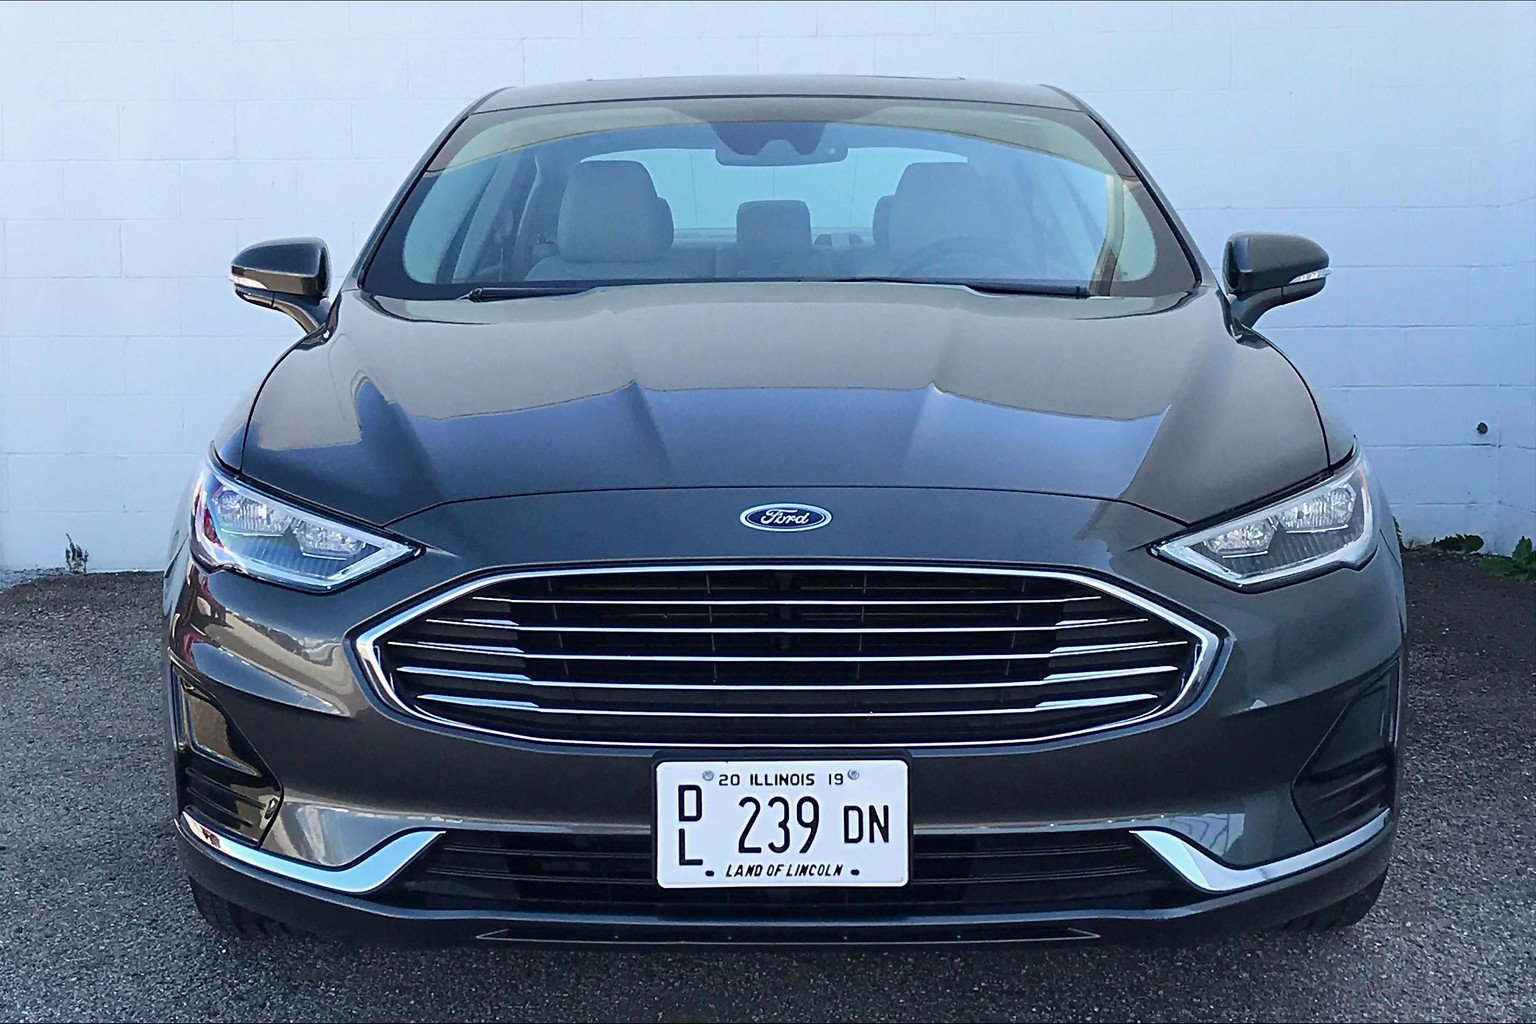 Pre-Owned 2019 Ford Fusion Hybrid SEL FWD 4dr Car in Morton #149684 ...